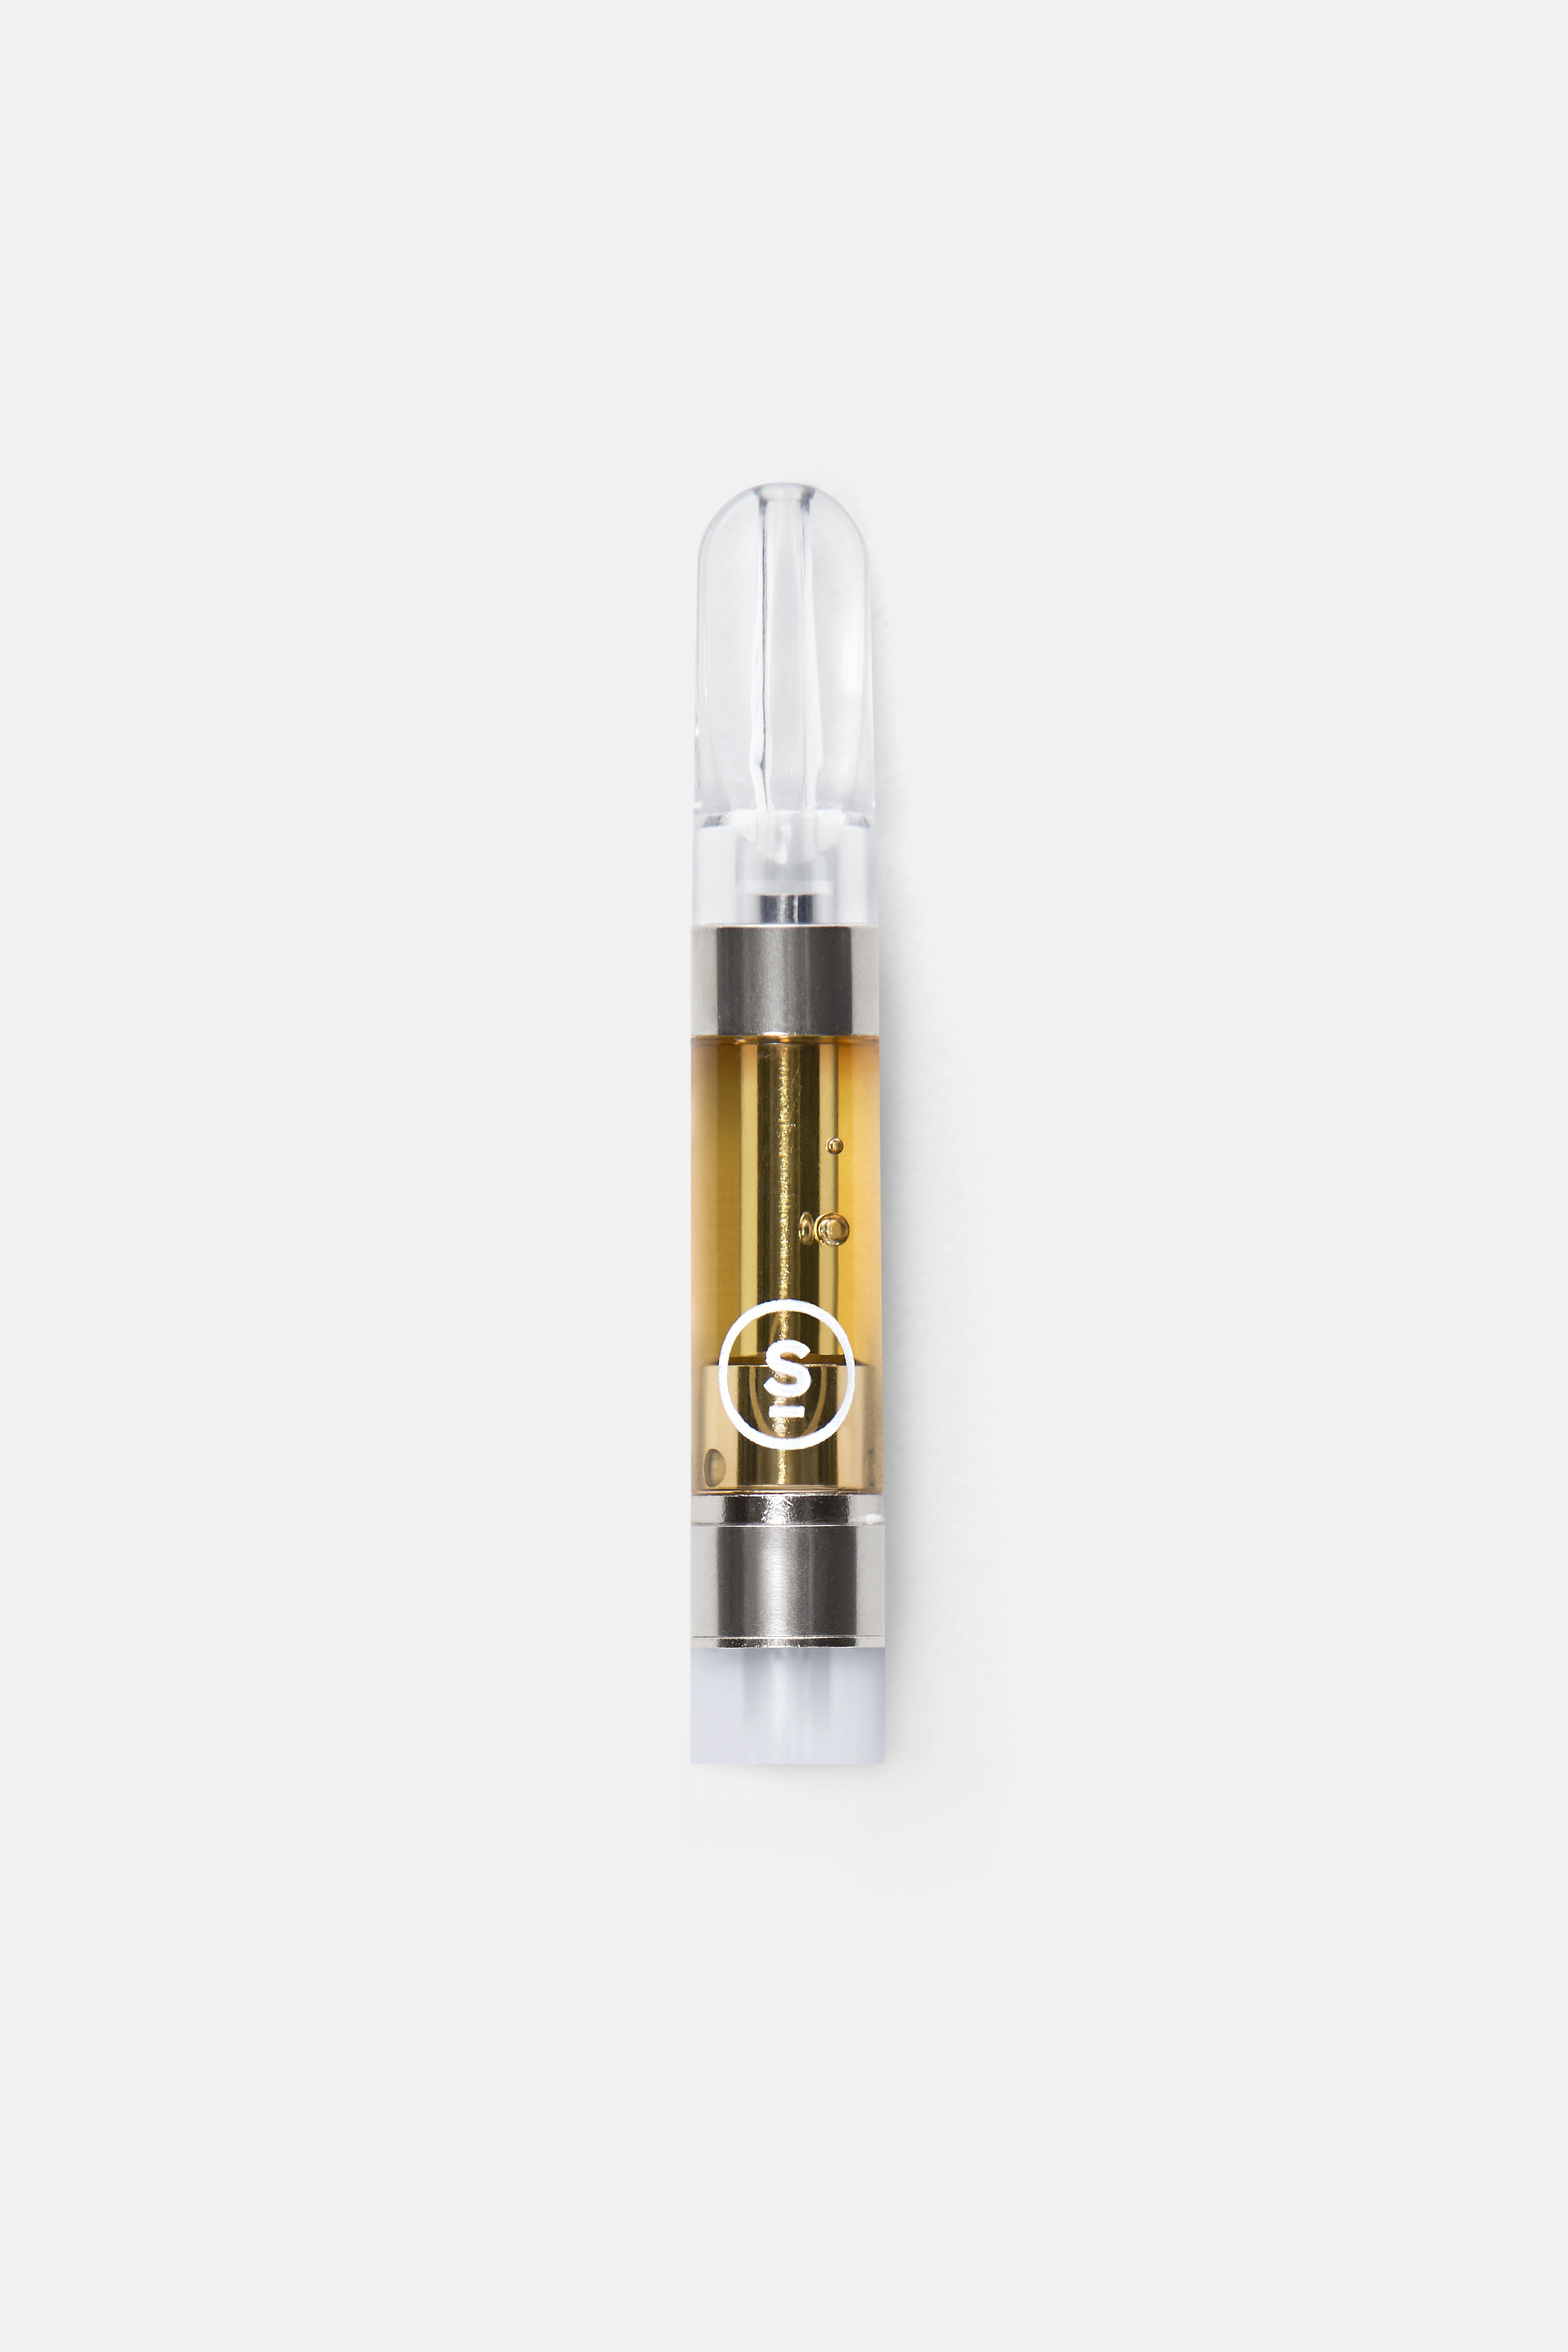 concentrate-select-elite-thc-cartridges-clementine-cartridge-1000mg